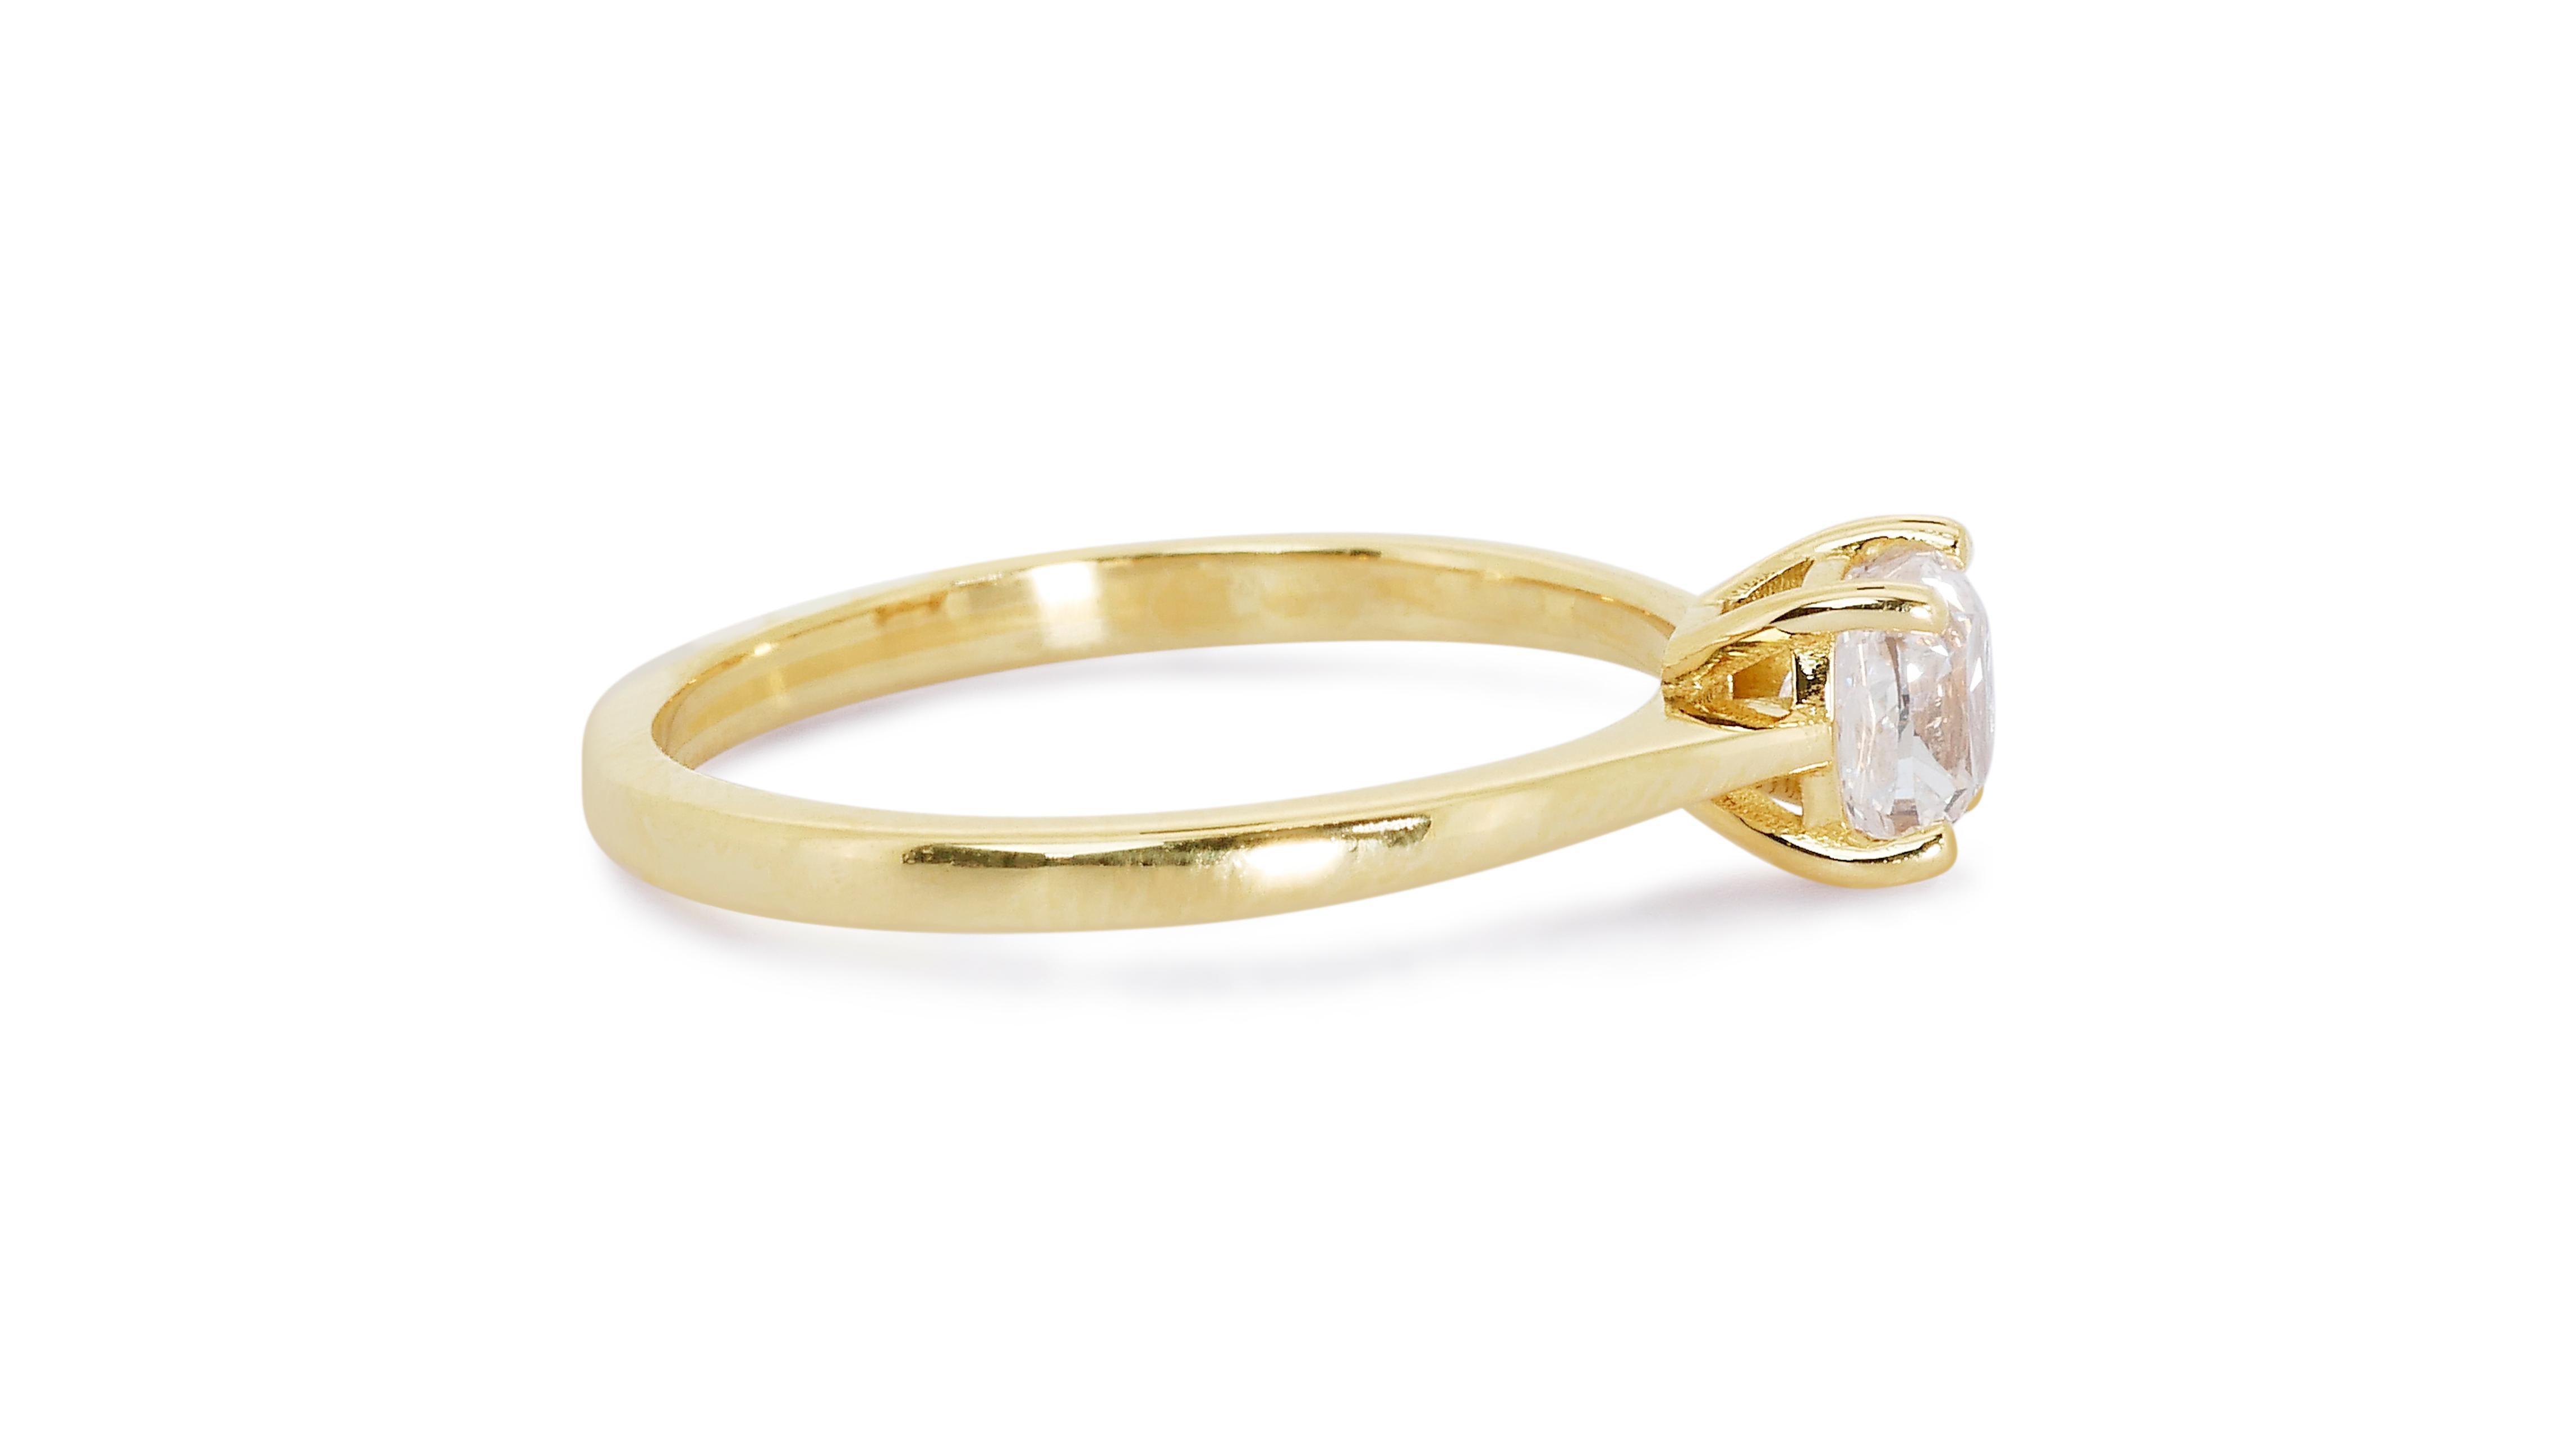 Women's Glamorous 18k Yellow Gold Solitaire Ring w/ 0.7 Carat Natural Diamonds AIG Cert For Sale